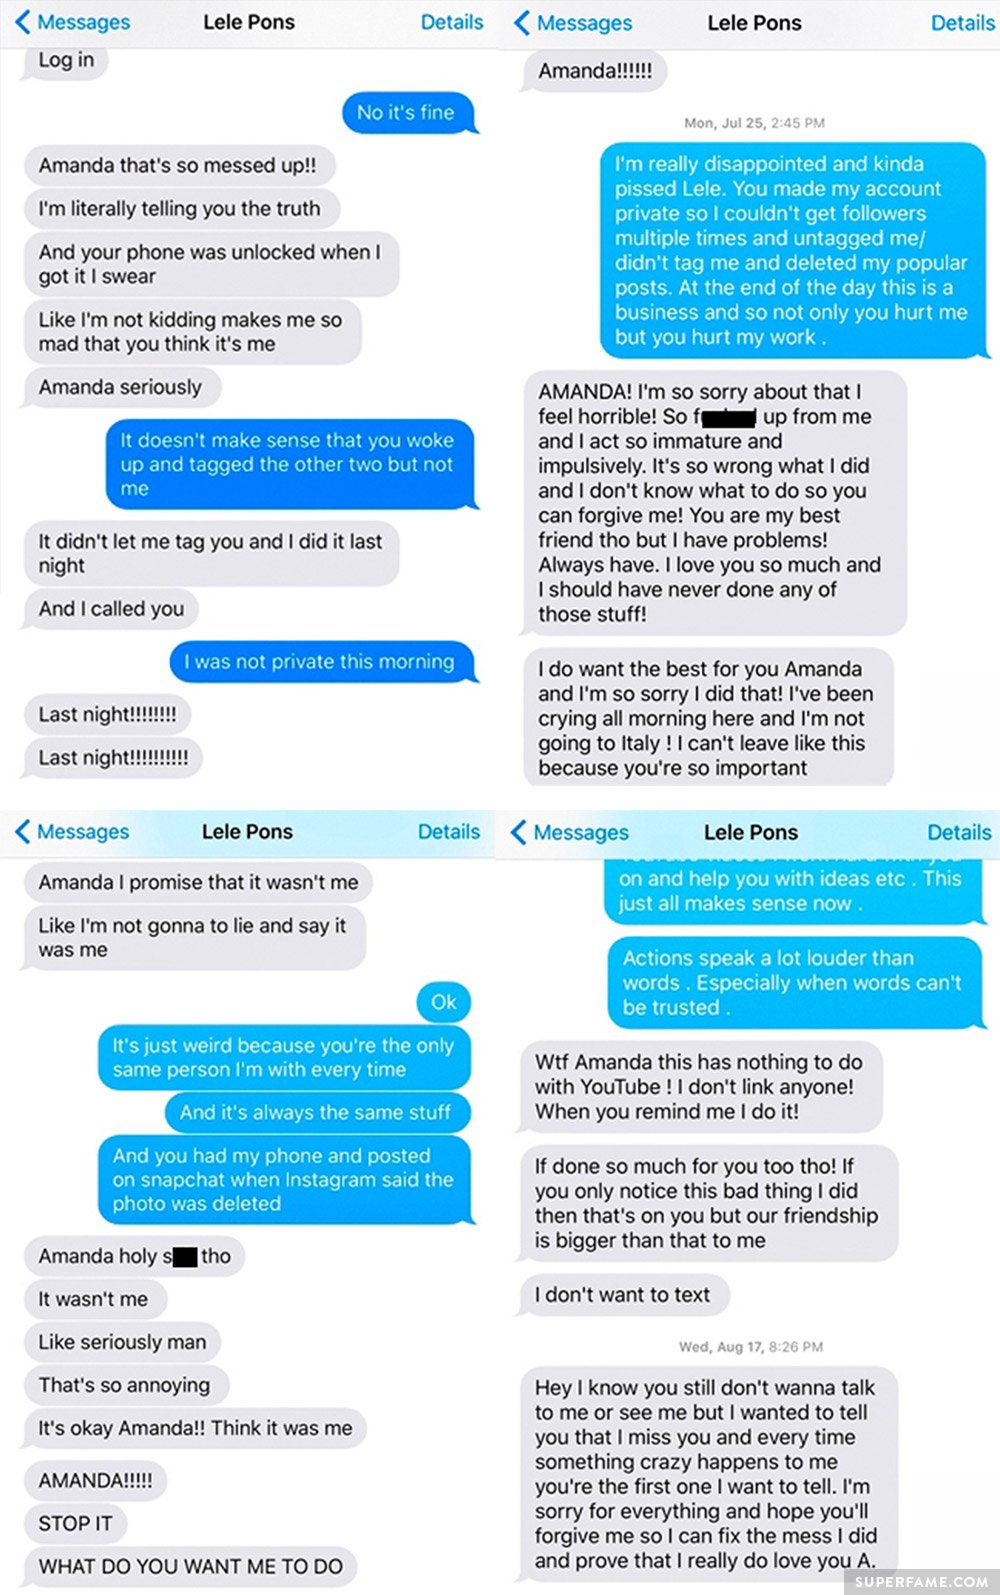 Lele and Amanda's text messages.